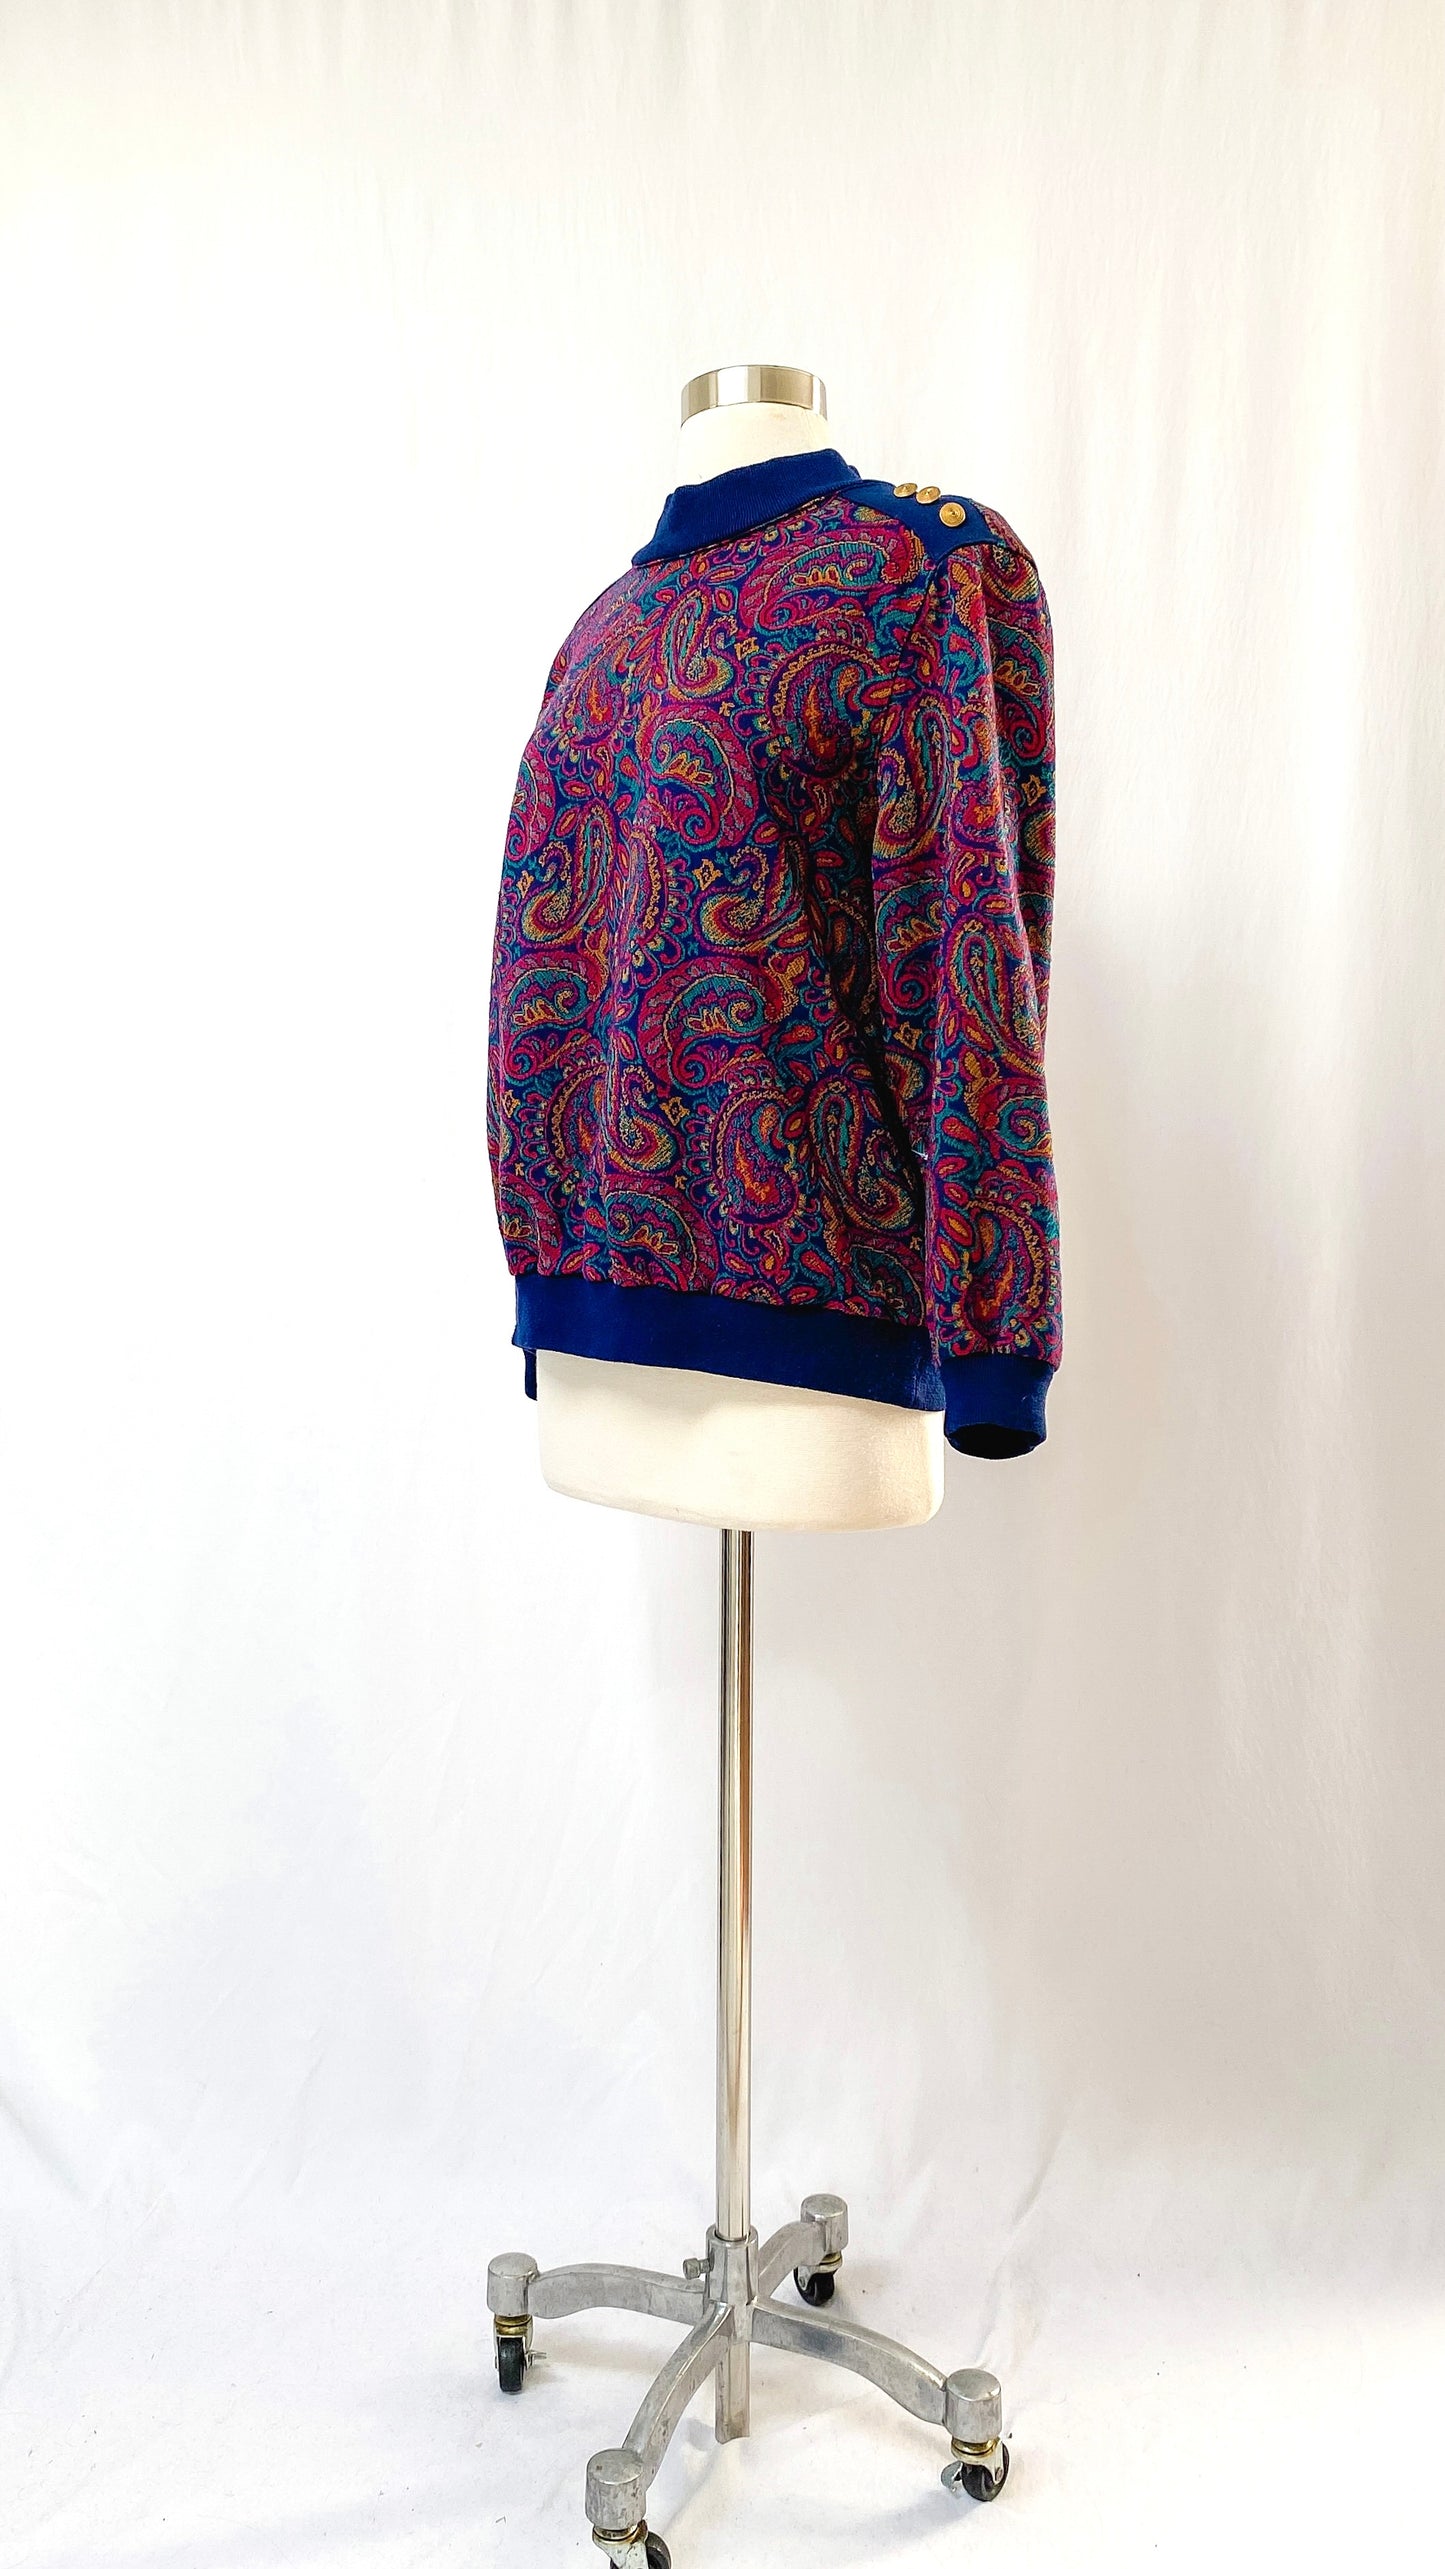 Vintage 90’s Alfred Dunner Paisley Knit Top (M/L)